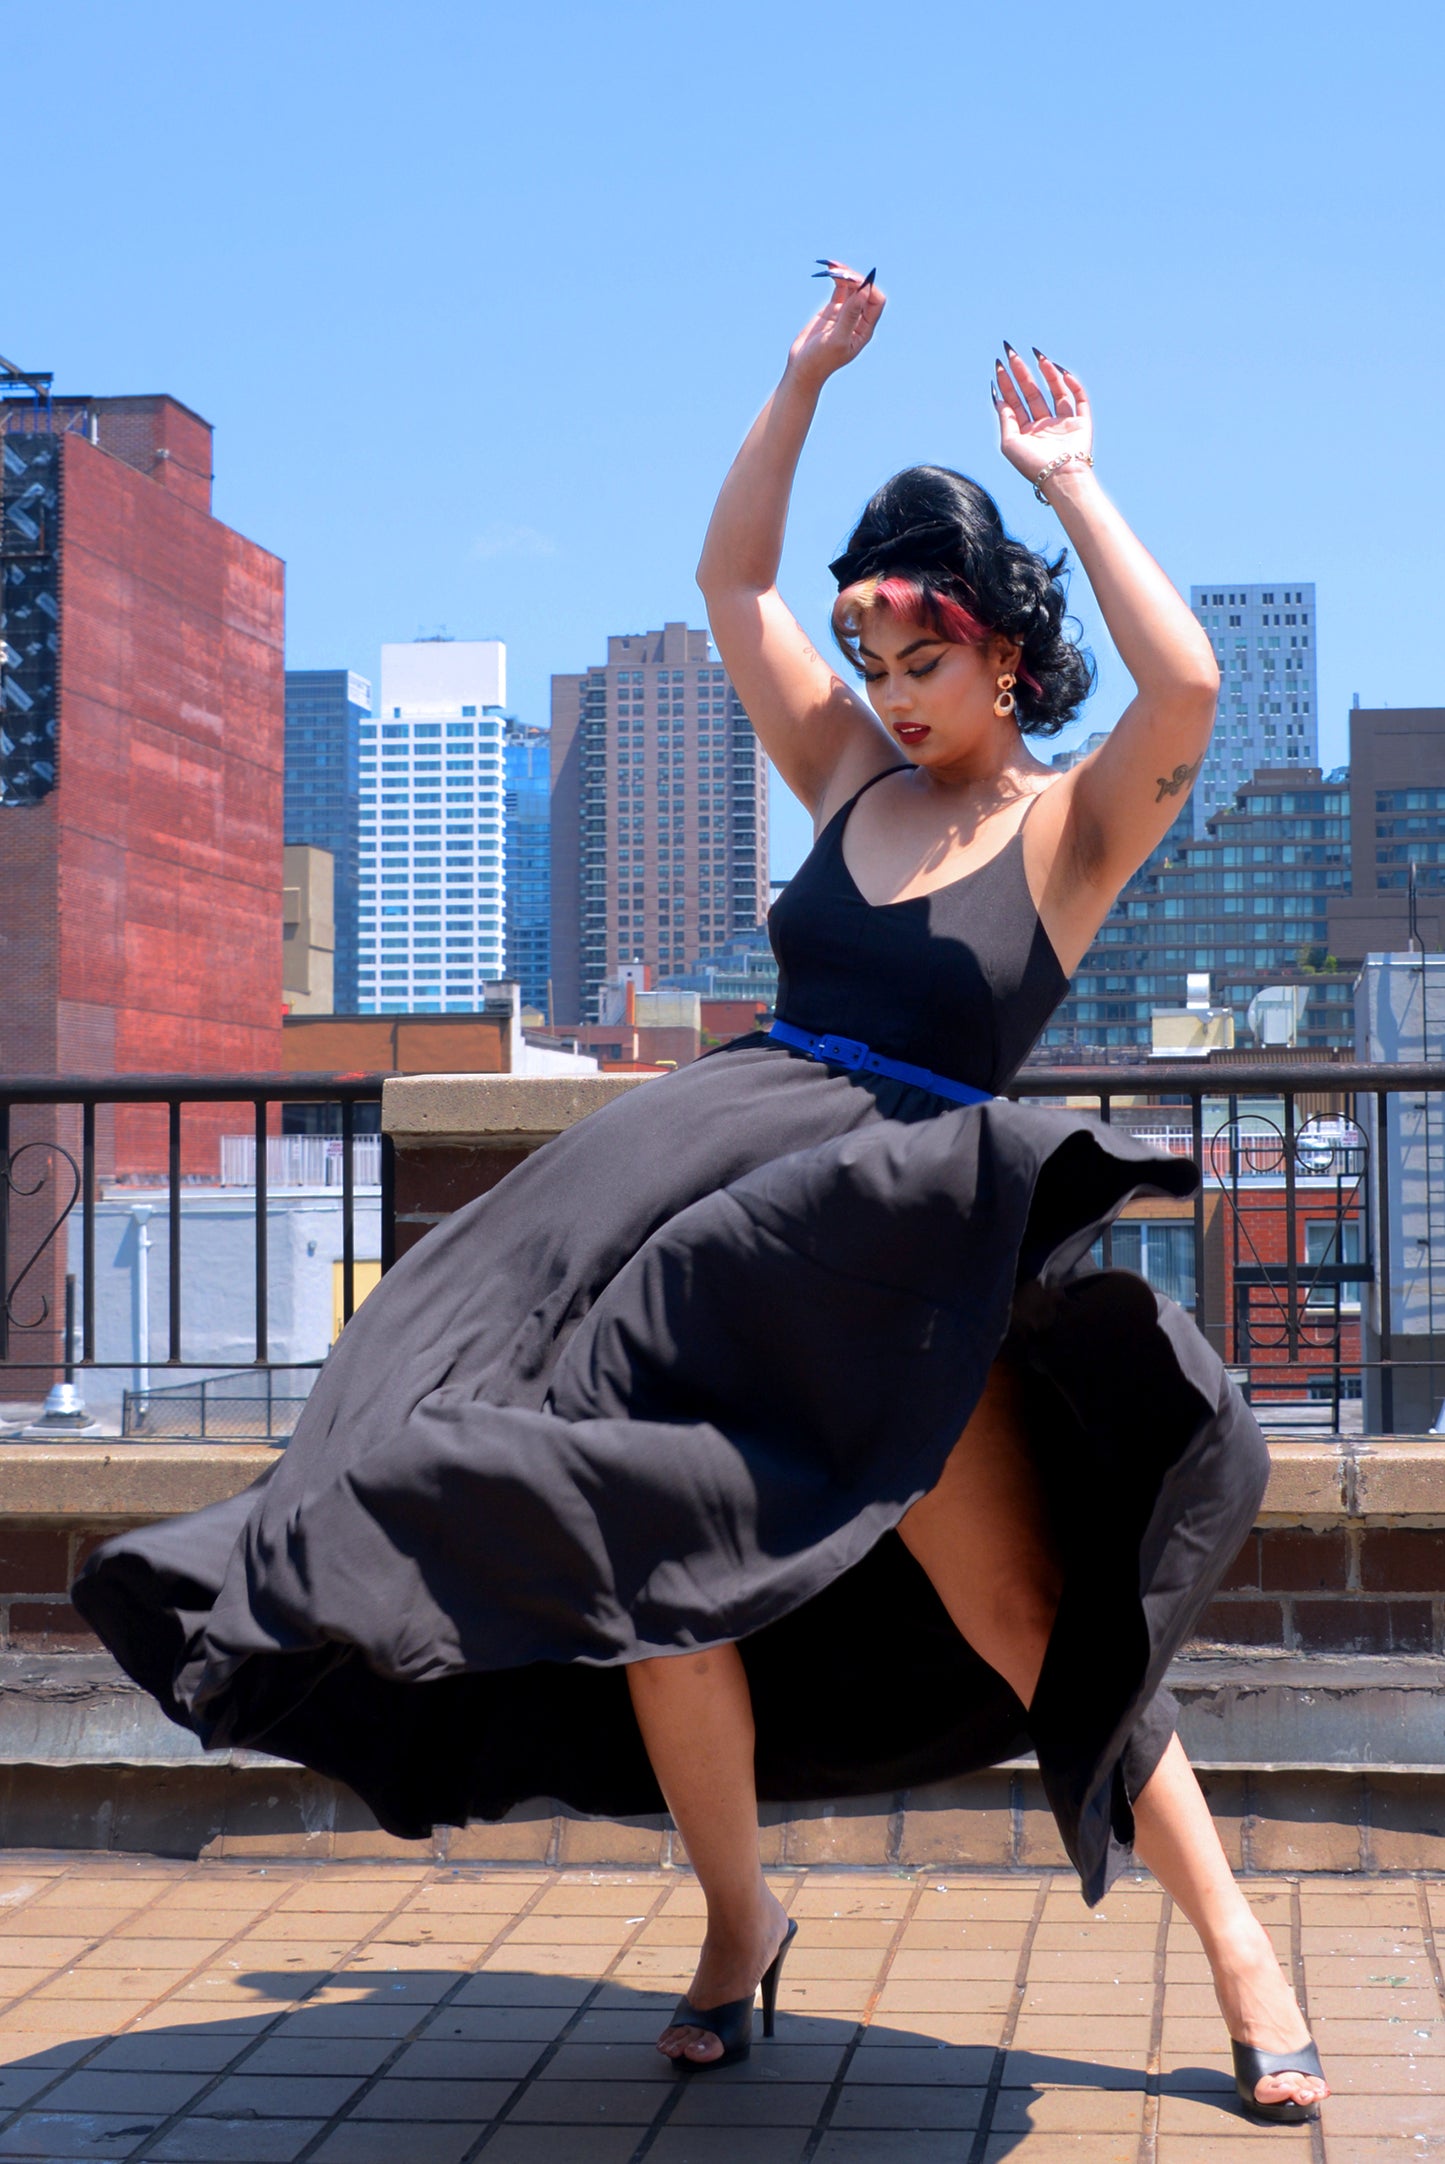 Coming Soon - Amalie Ballerina Daytime Maxi Gown in Solid Black | Pinup Couture